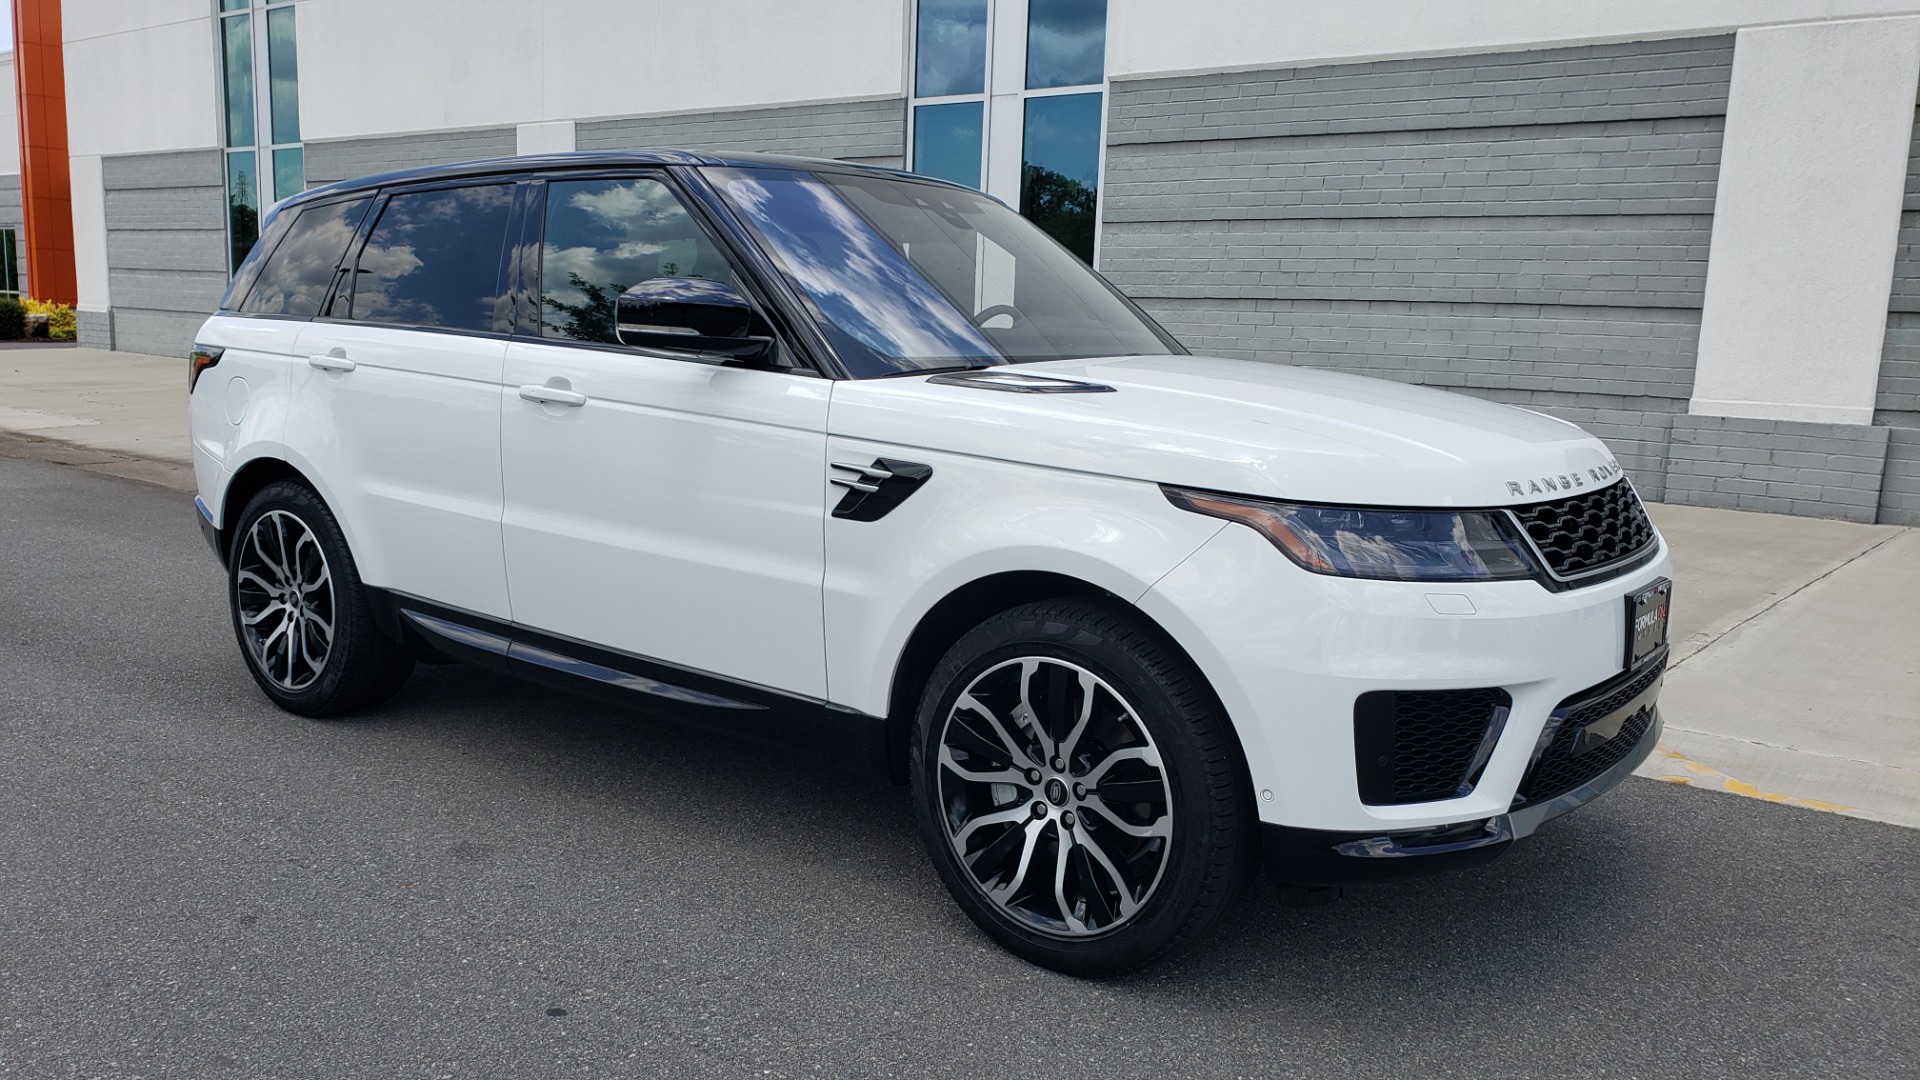 Used 2018 Land Rover RANGE ROVER SPORT HSE / 3.0L SC V6 / 4X4 / NAV / SUNROOF / LANE ASST / REARVIEW for sale Sold at Formula Imports in Charlotte NC 28227 9